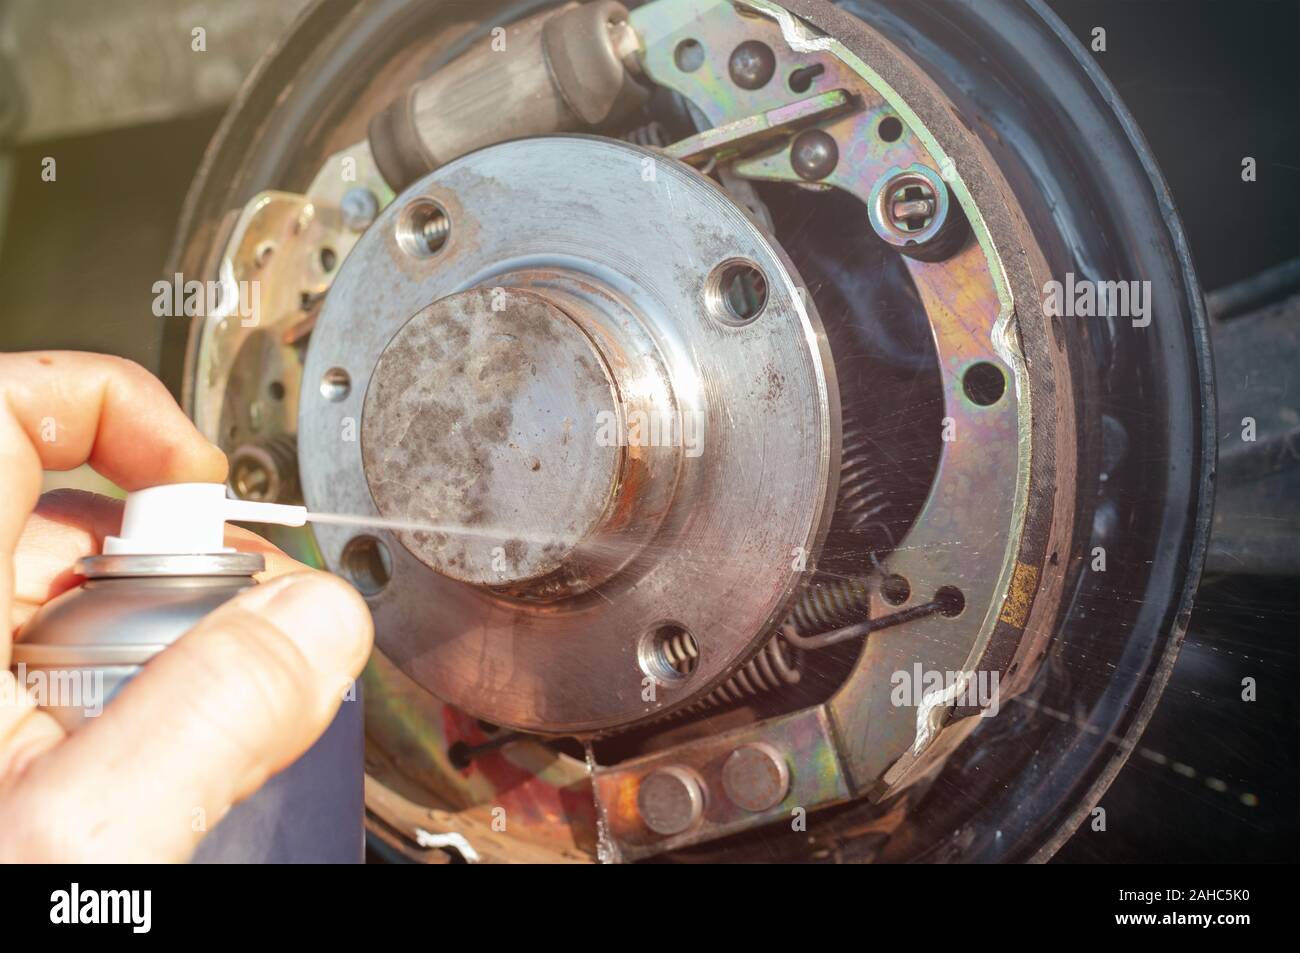 Car drum brake cleaning with spray Stock Photo